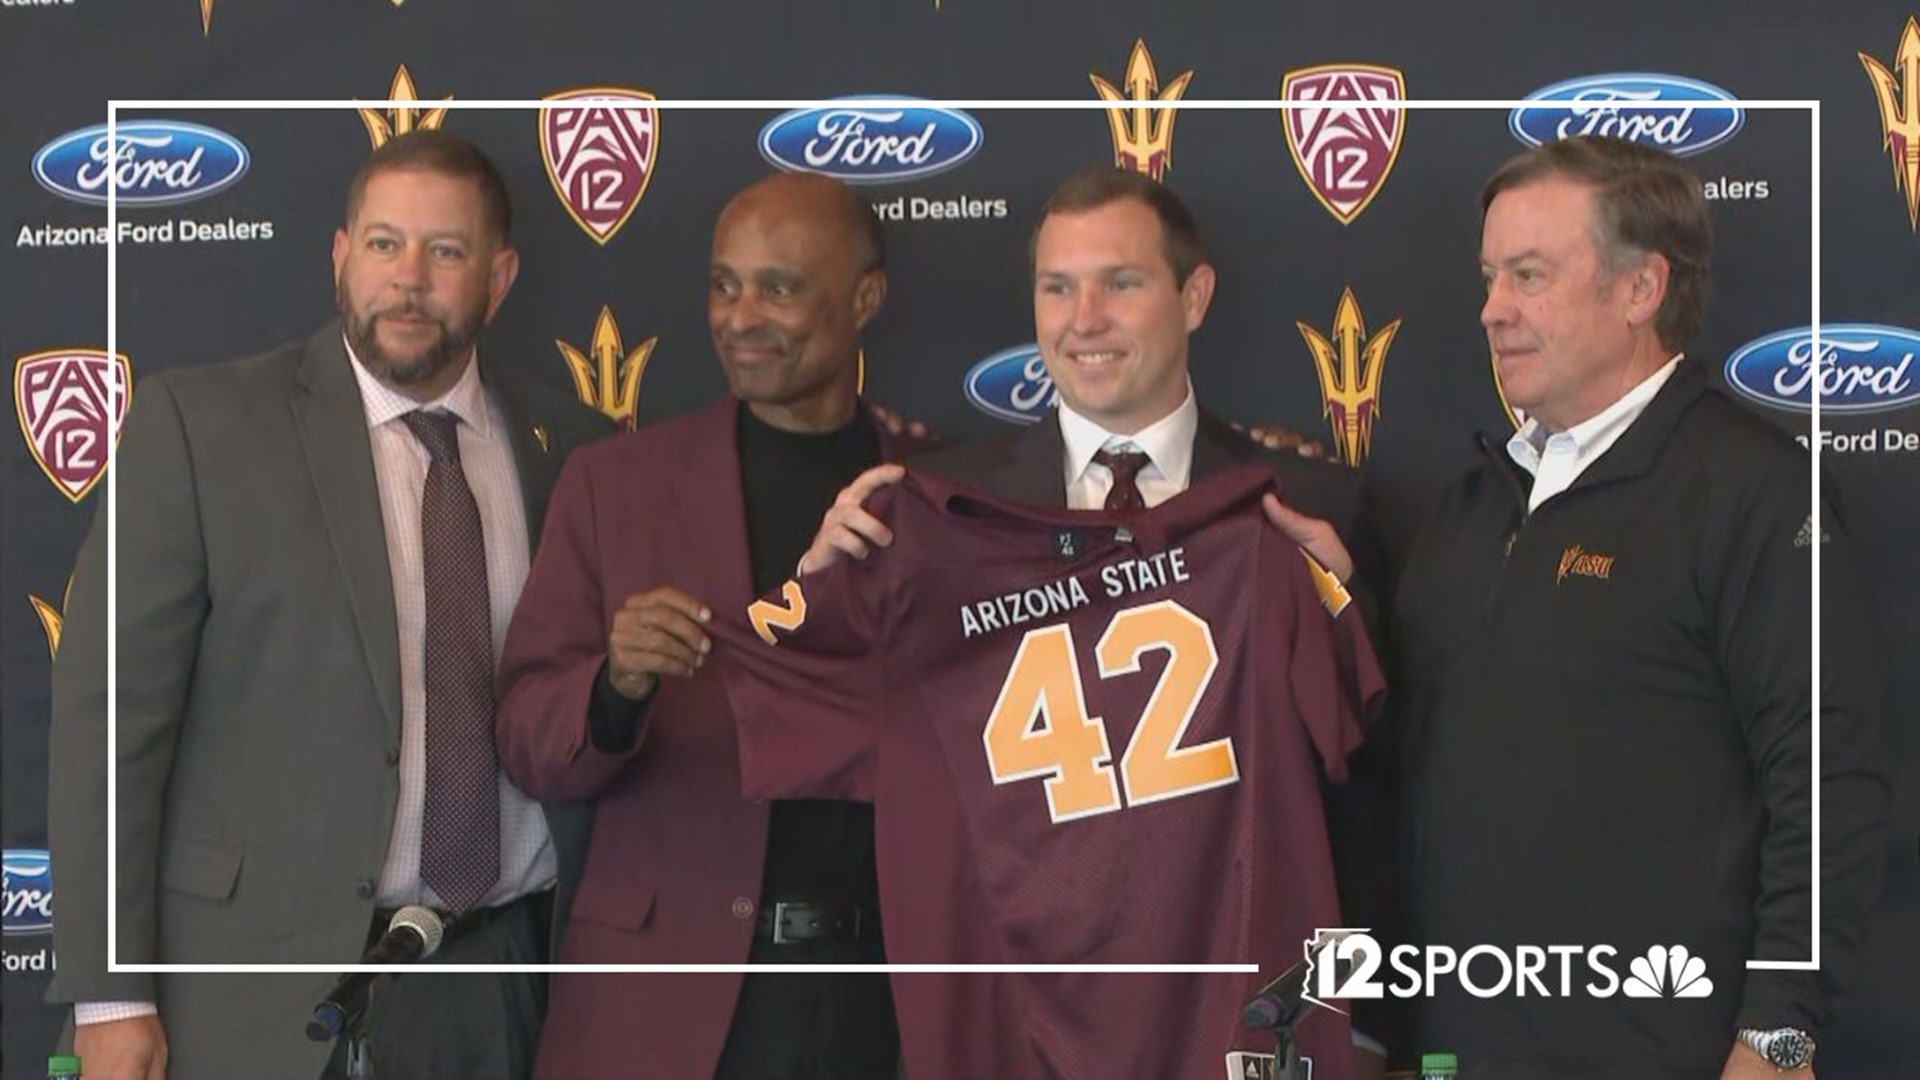 The Arizona State University football team introduced their new head coach over the weekend. Here's what you need to know about Kenny Dillingham.